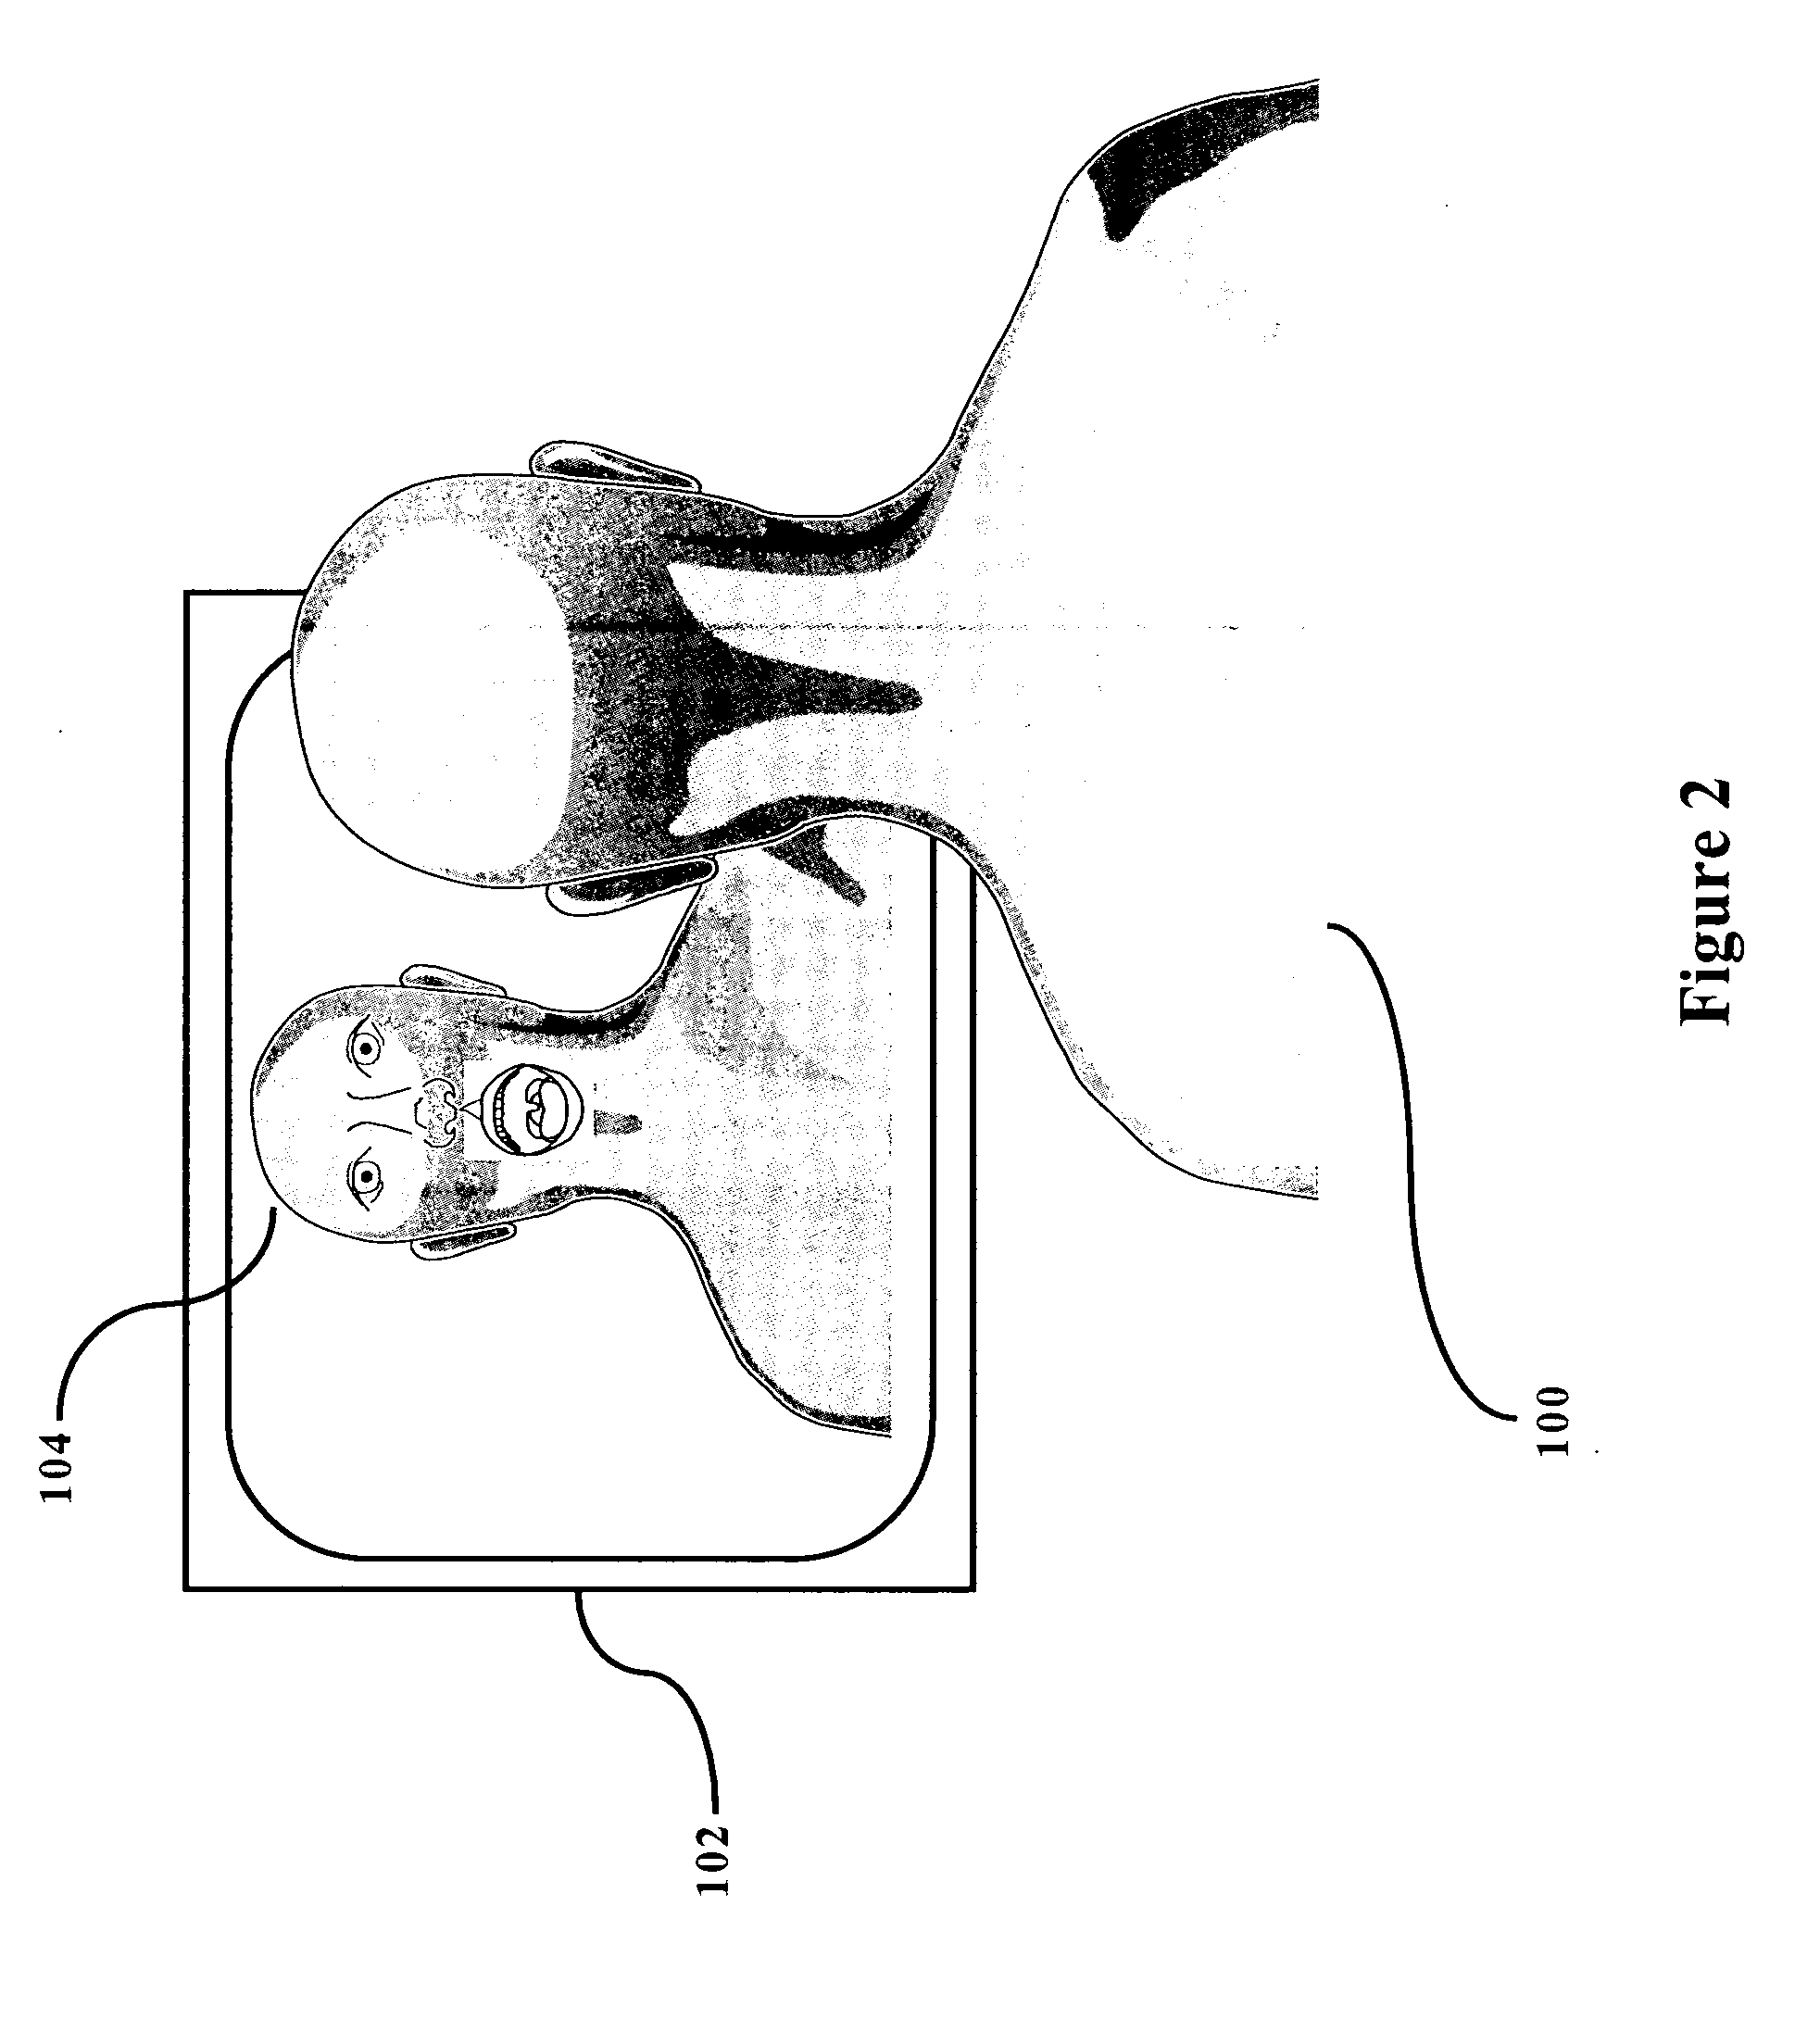 System and method for assisting speech development for the hearing-challenged